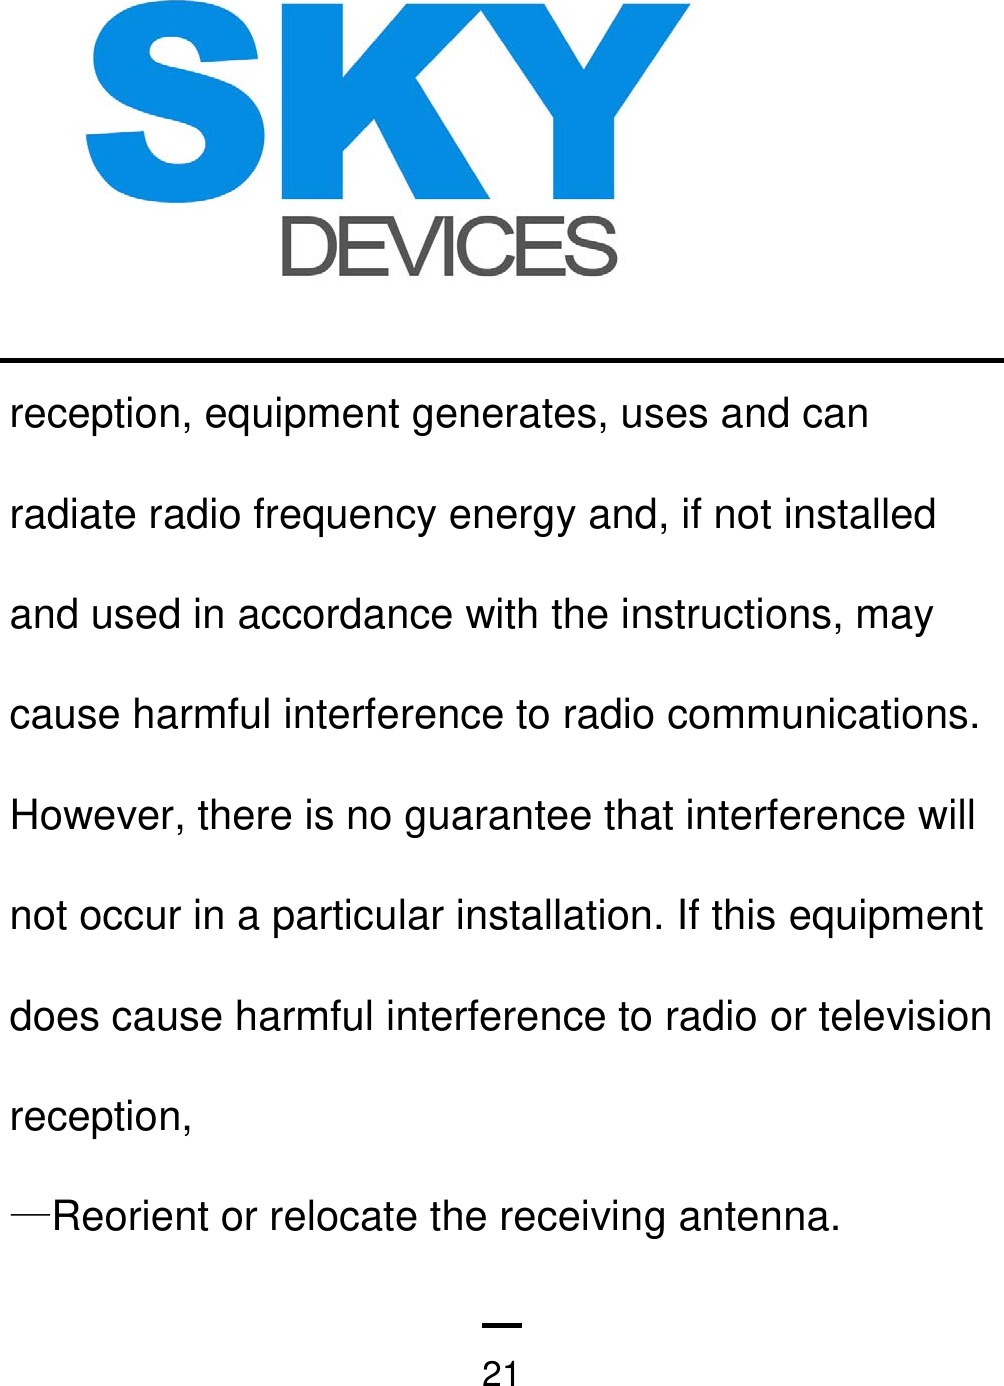   21reception, equipment generates, uses and can radiate radio frequency energy and, if not installed and used in accordance with the instructions, may cause harmful interference to radio communications. However, there is no guarantee that interference will not occur in a particular installation. If this equipment does cause harmful interference to radio or television reception, —Reorient or relocate the receiving antenna.       